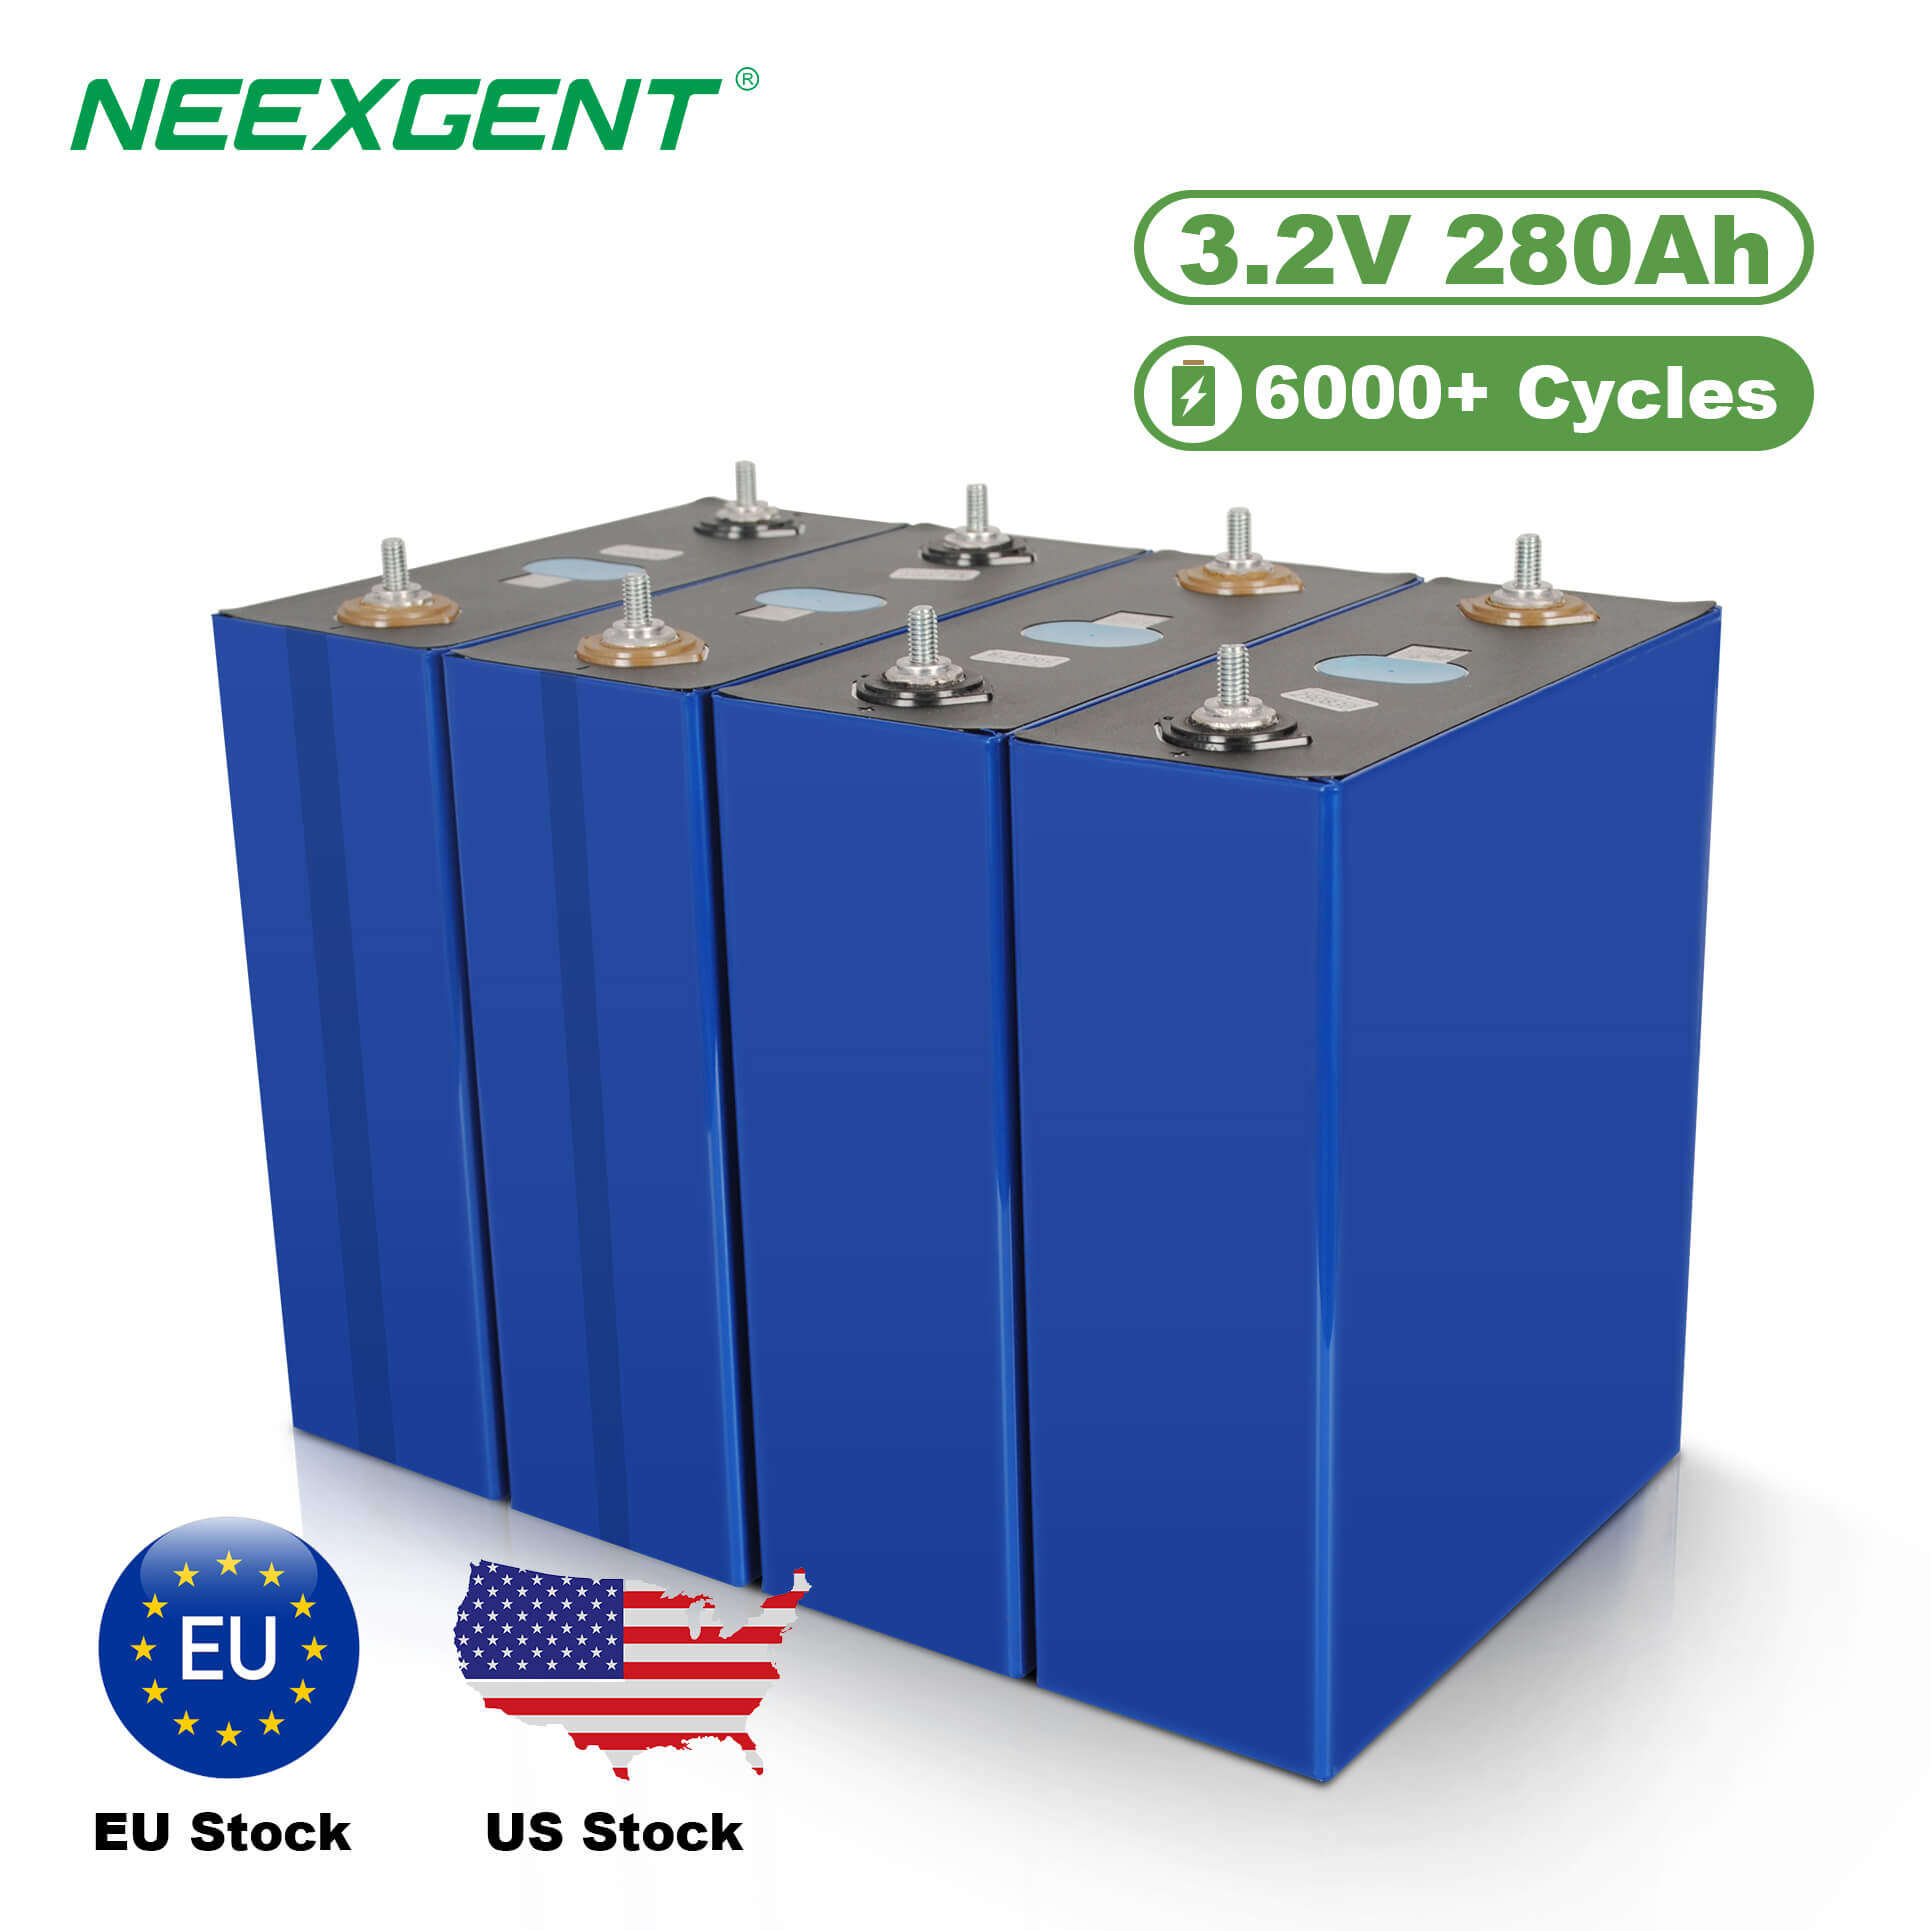 Neexgent Lithium Iron Phosphate Battery Cell 3.2v 280ahlithium Iron Phosphate Lifepo4 Cells